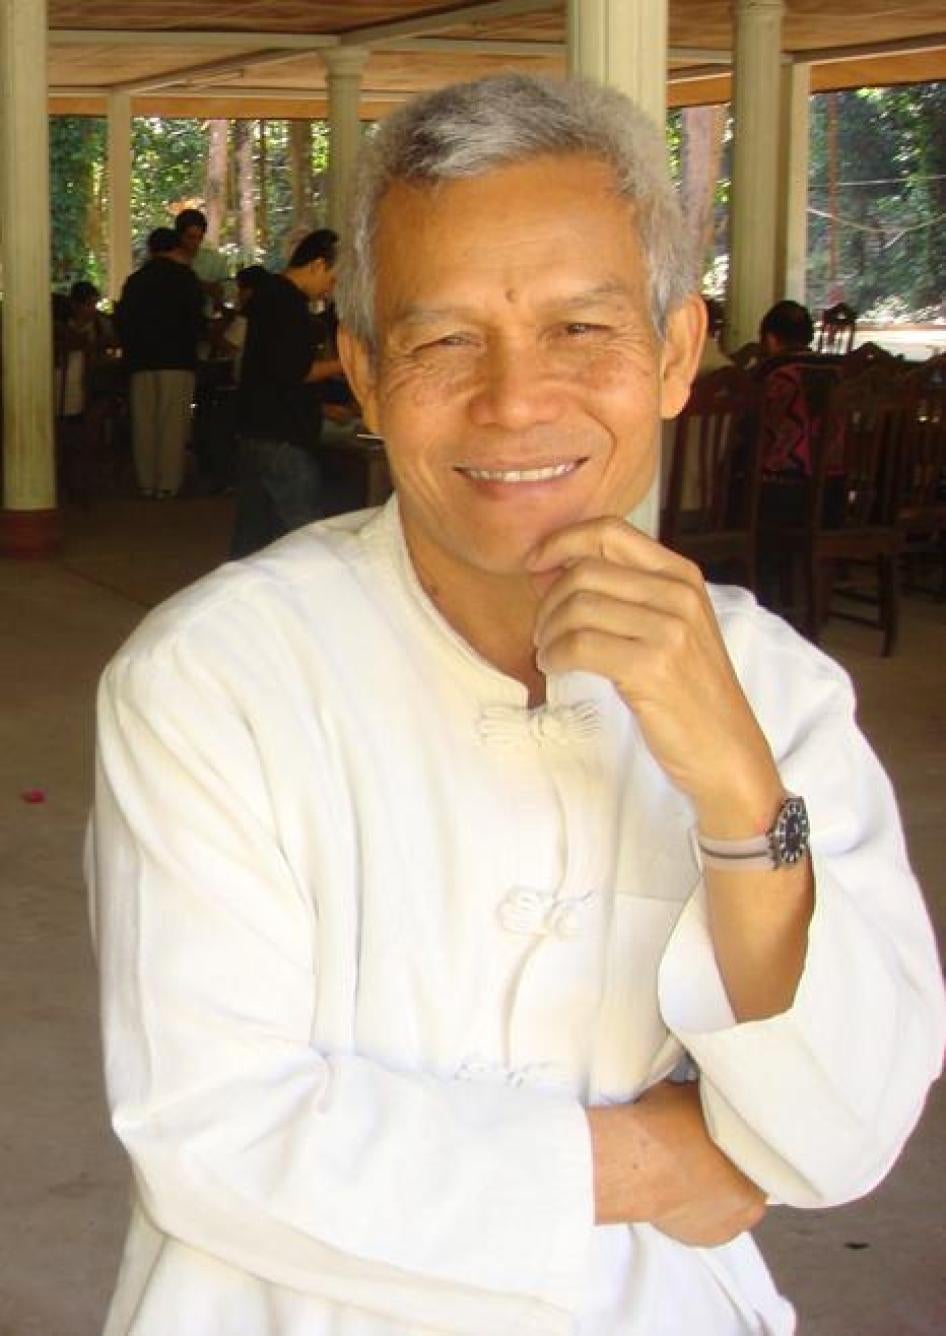 Sombath Somphone, a prominent Lao activist, has been forcibly disappeared in Vientiane since December 2012. 